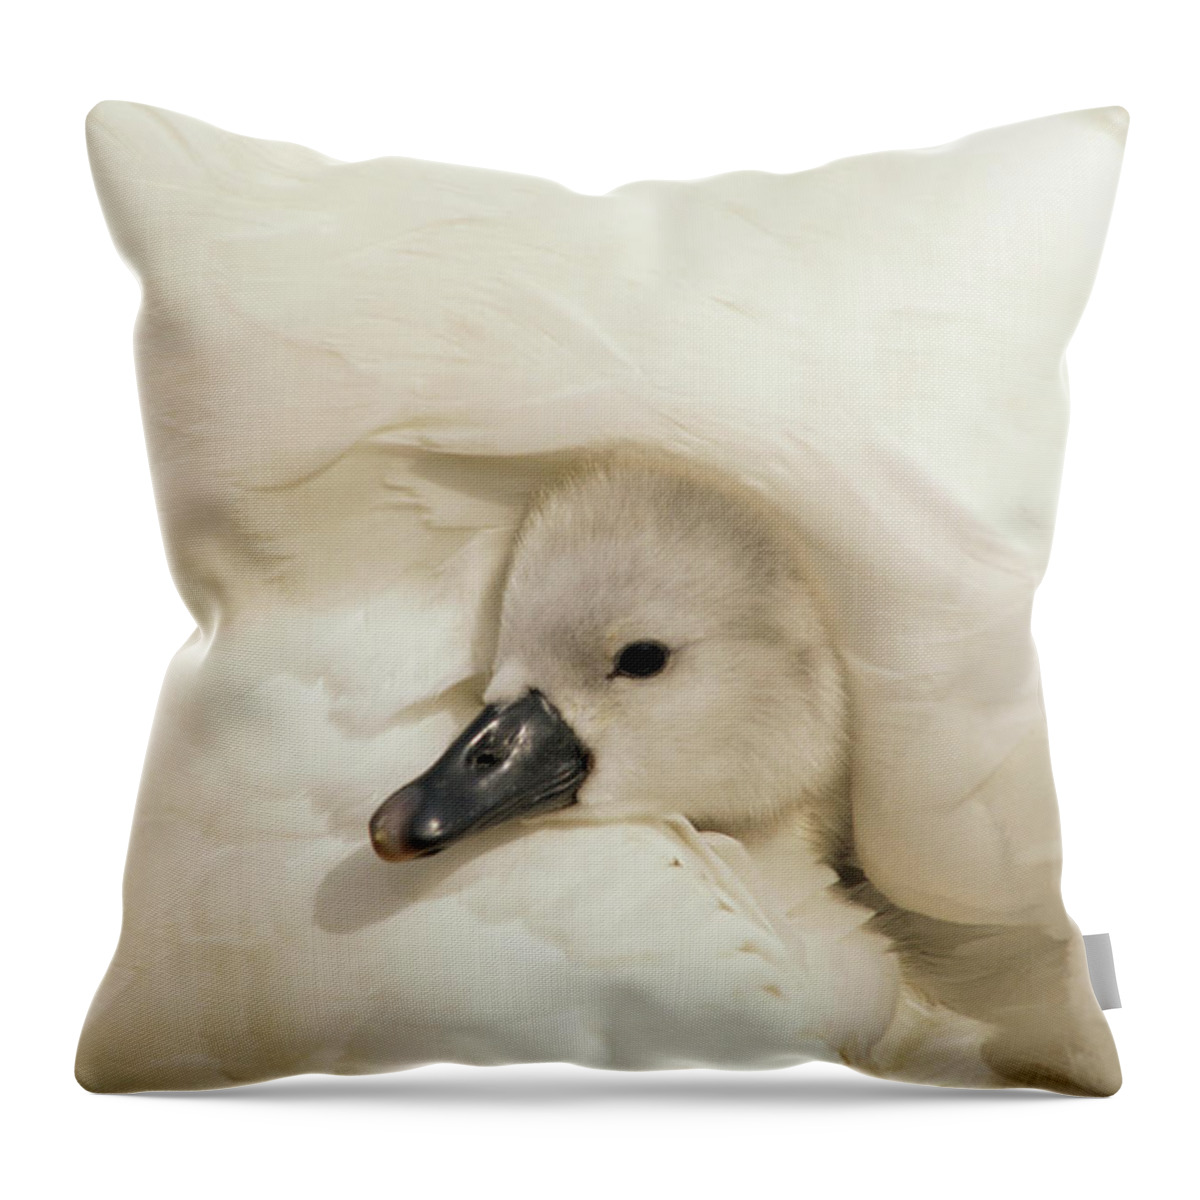 00278828 Throw Pillow featuring the photograph Mute Swan Cygnet by Flip De Nooyer